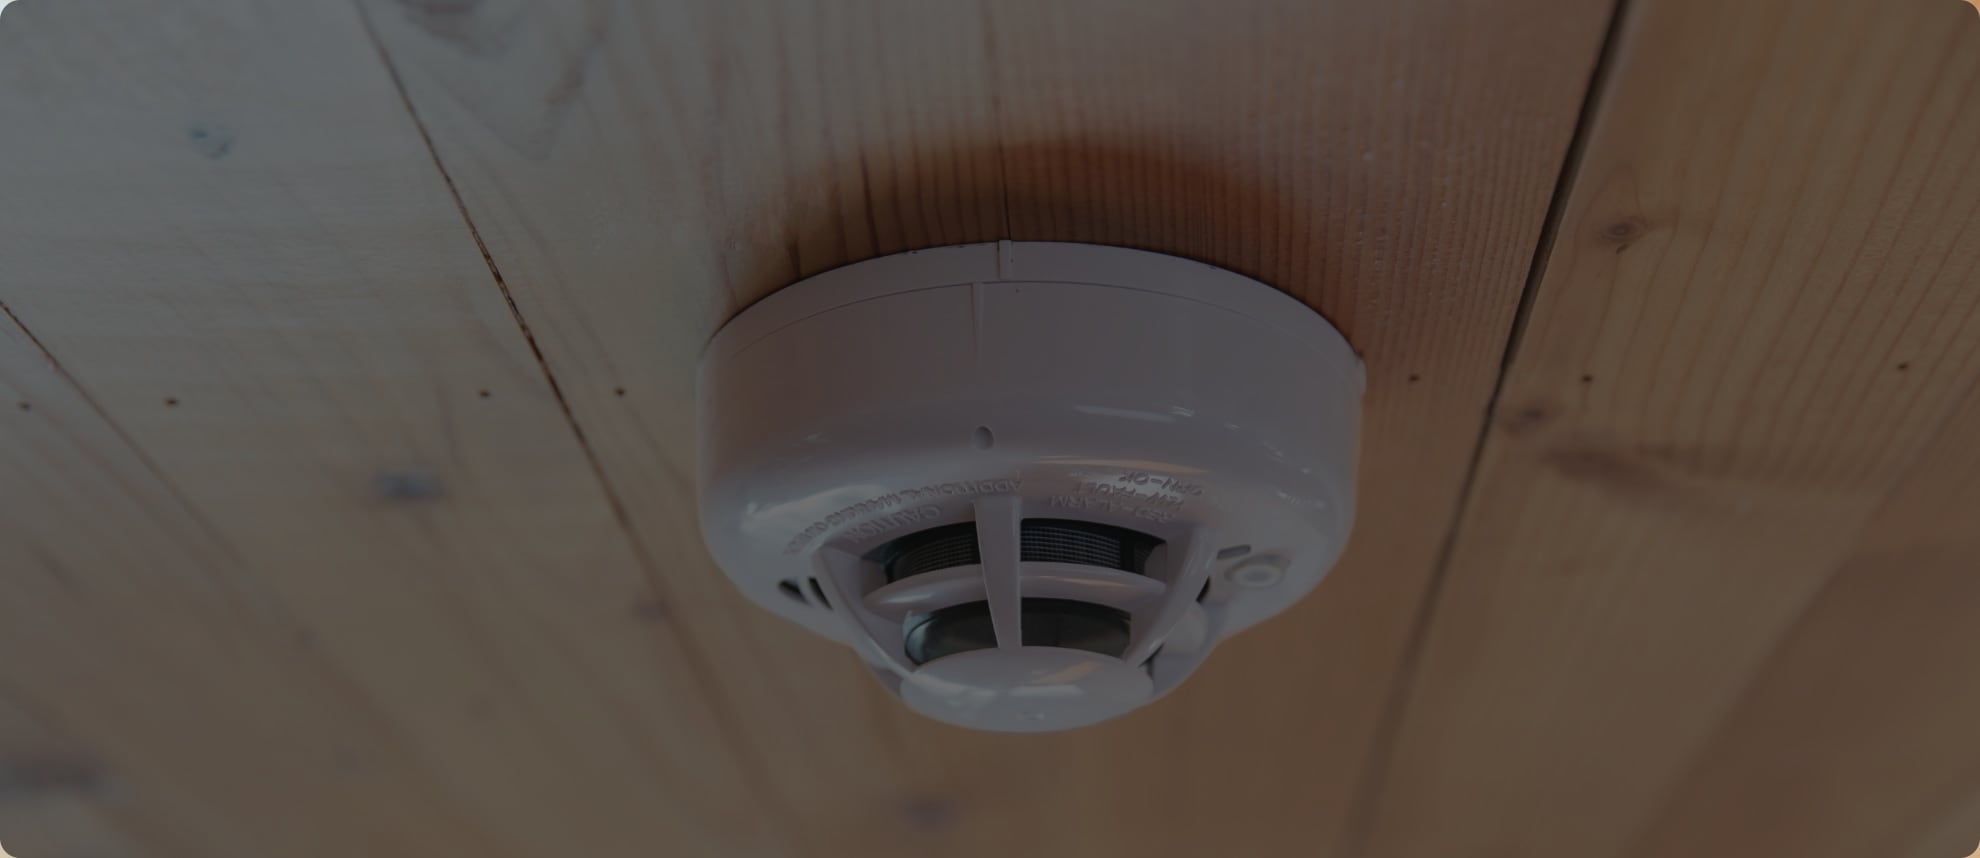 Vivint Monitored Smoke Alarm in College Station